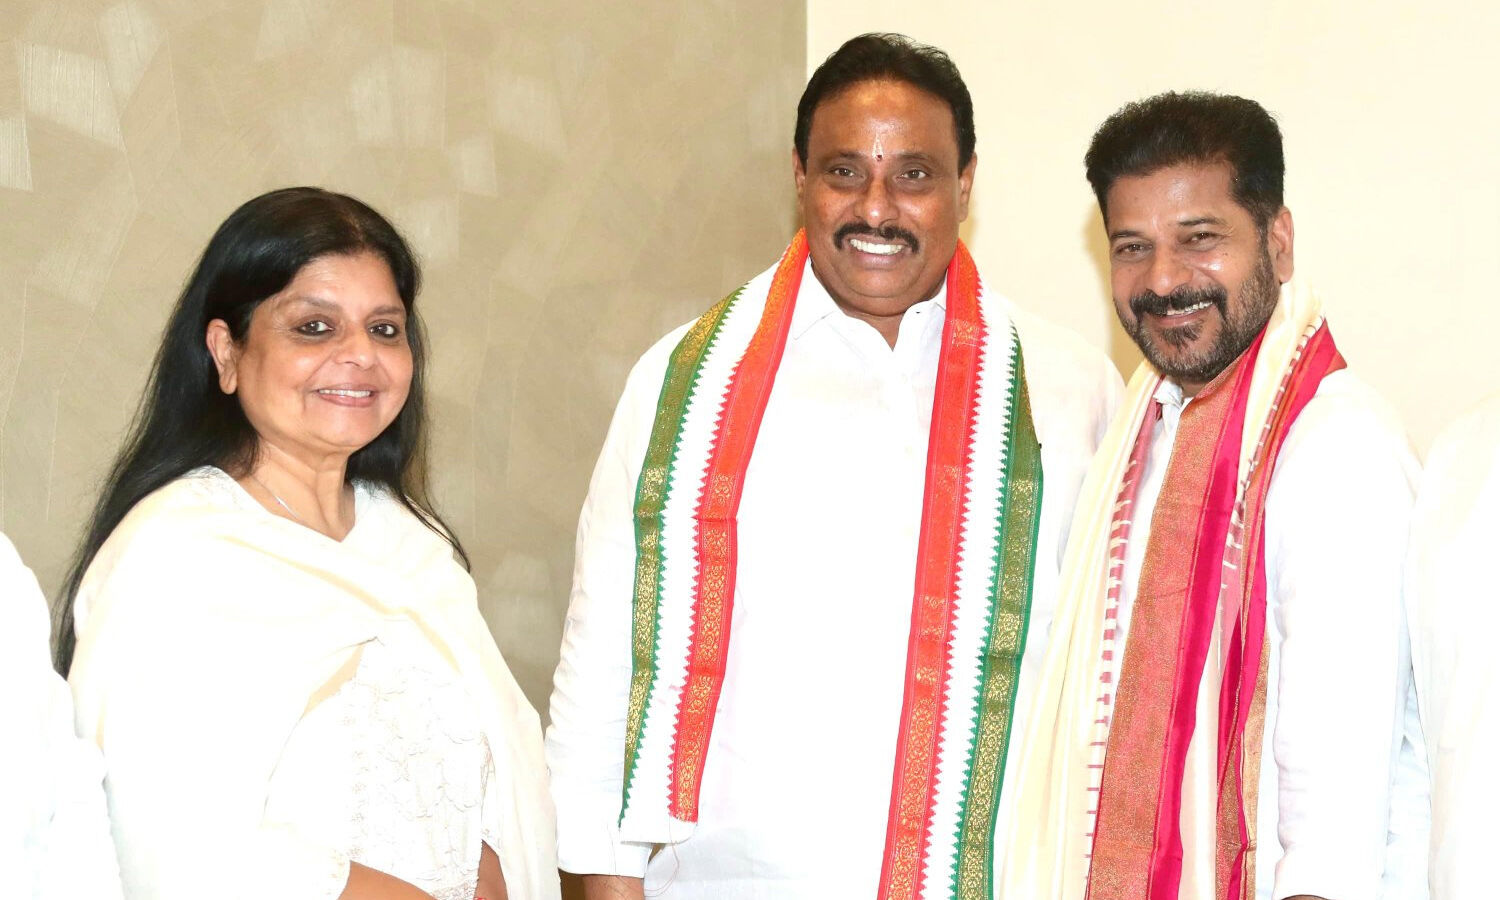 Yet another jolt for BRS as Ranjit Reddy, Danam join Congress